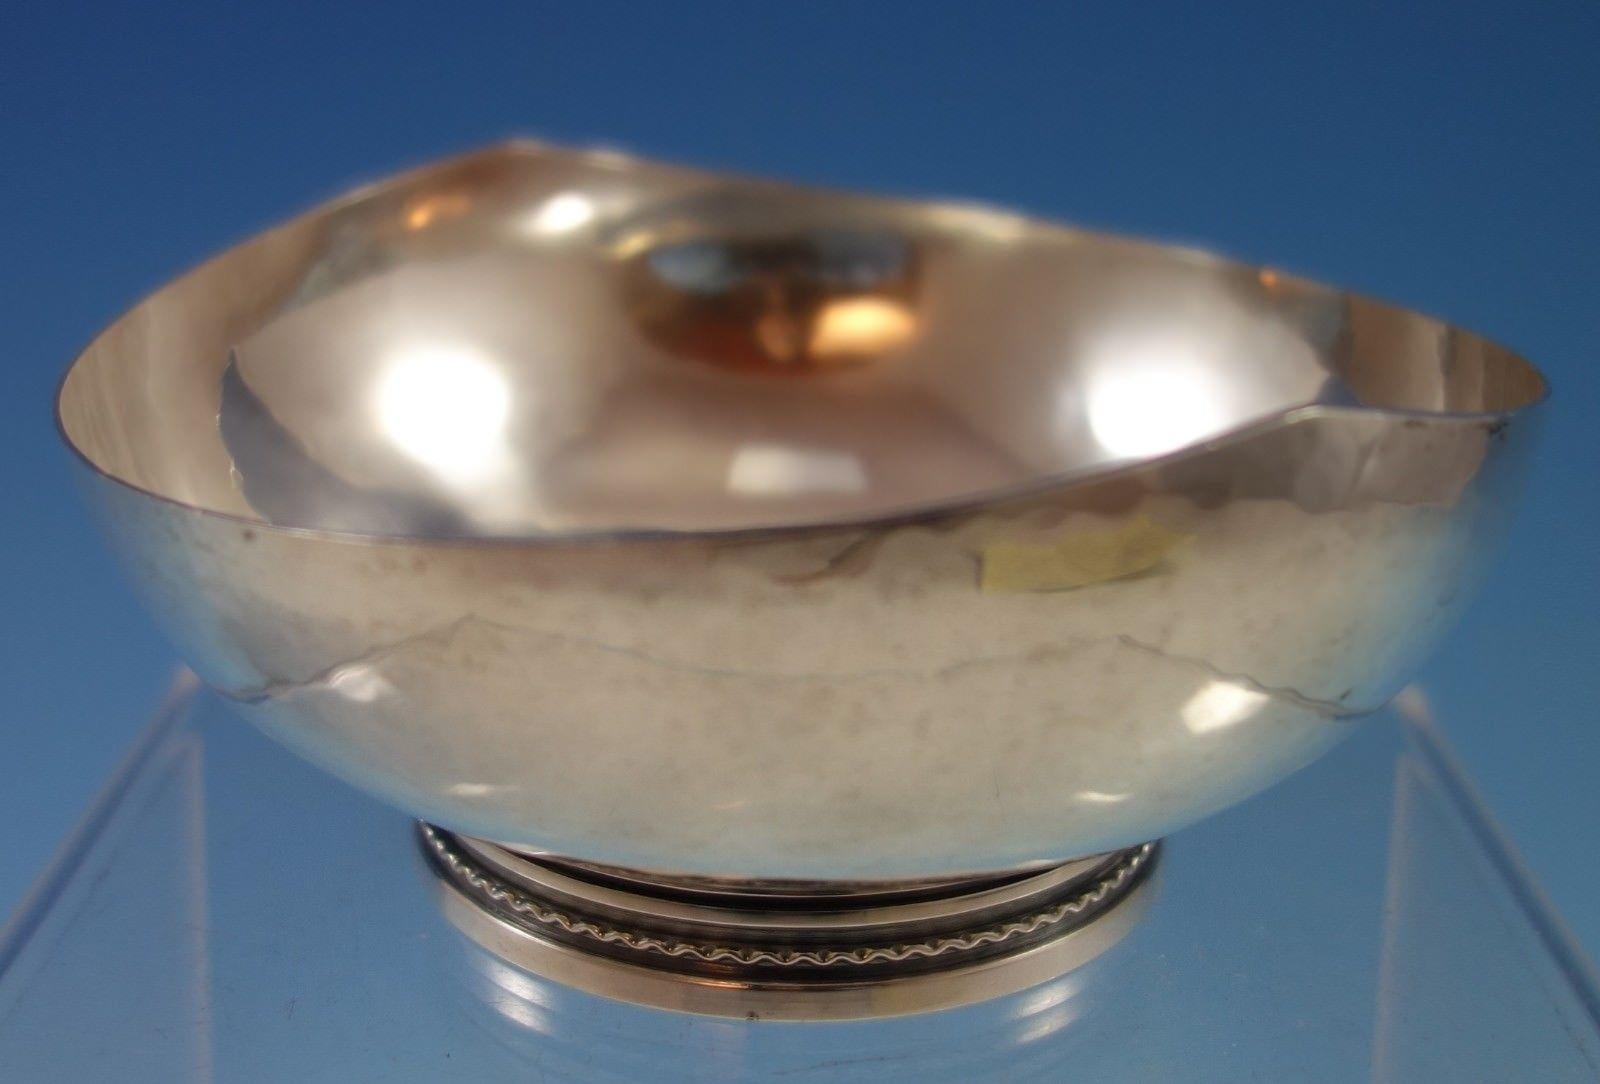 K. G. Markstrom's Swedish .830 silver small oval bowl. The bowl is hand-hammered, and it's dated 1960. The bowl measures 2 x 4 1/2 x 4 1/2, and it weighs 4.8 ozt. It is has an inscription (see photo), and is in excellent condition.
